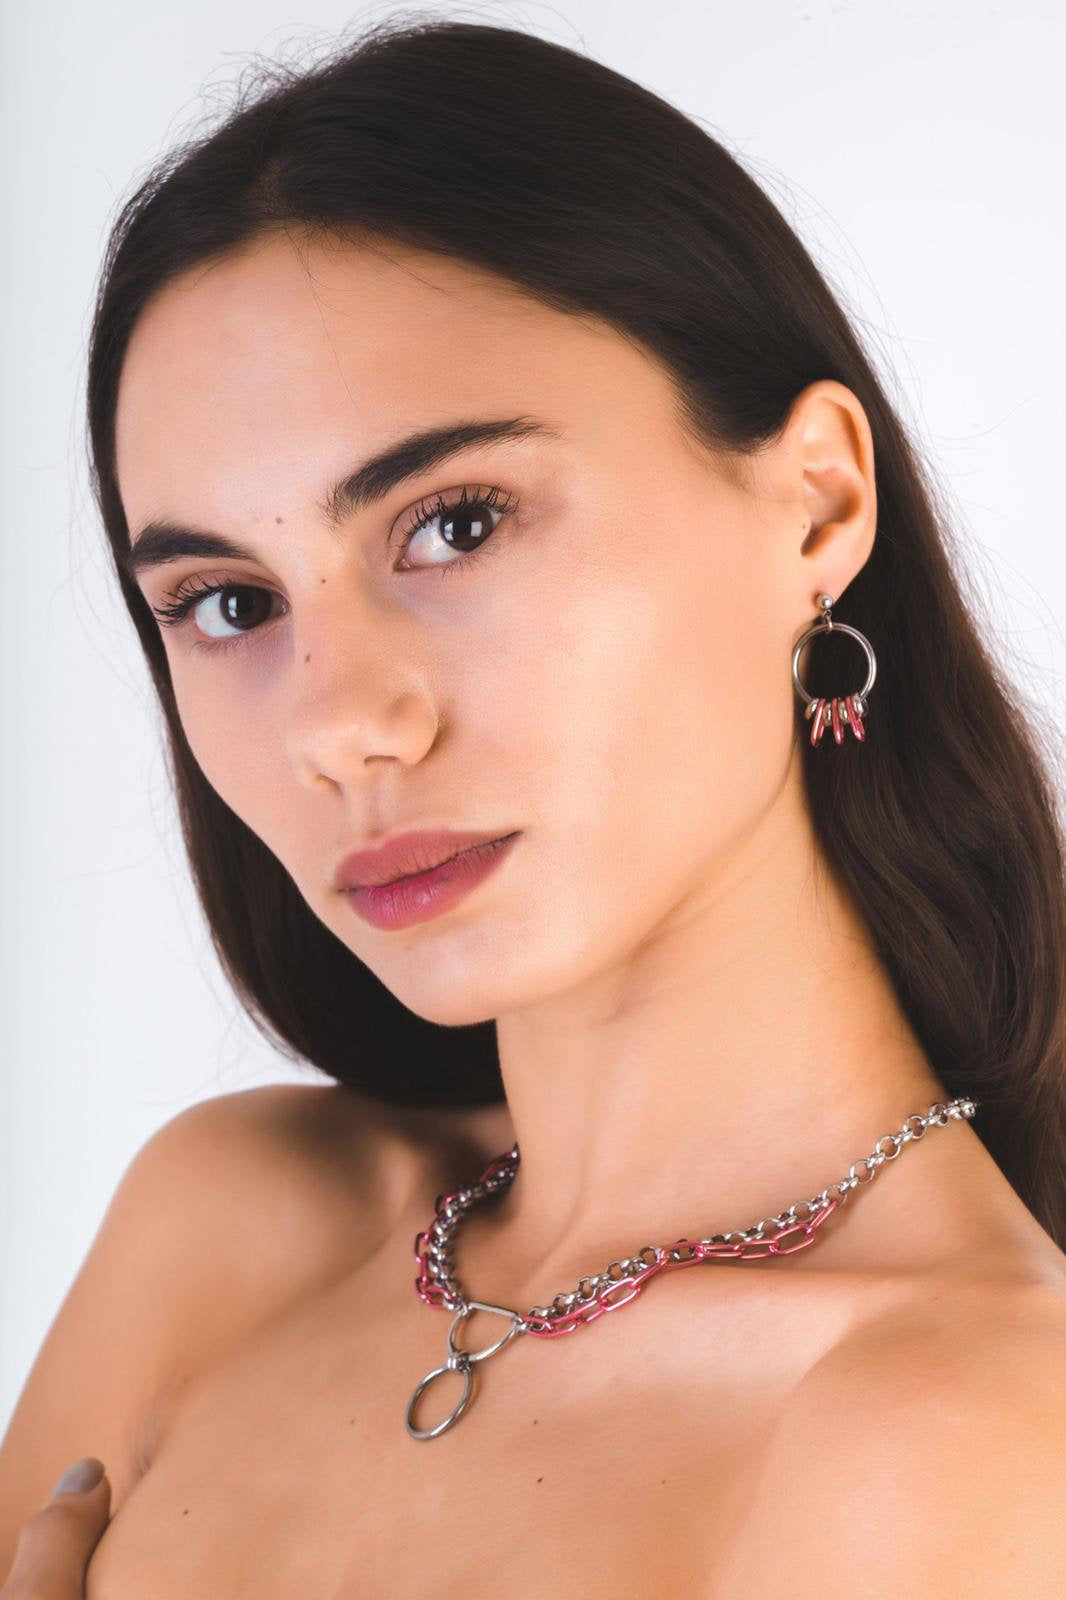 A model presents Myril Jewels' petite hoop earrings and matching necklace, each piece showcasing elegant silver craftsmanship with pink accents. This set epitomizes neo-gothic sophistication, making a statement for Halloween, daily goth wear, or as a unique gift